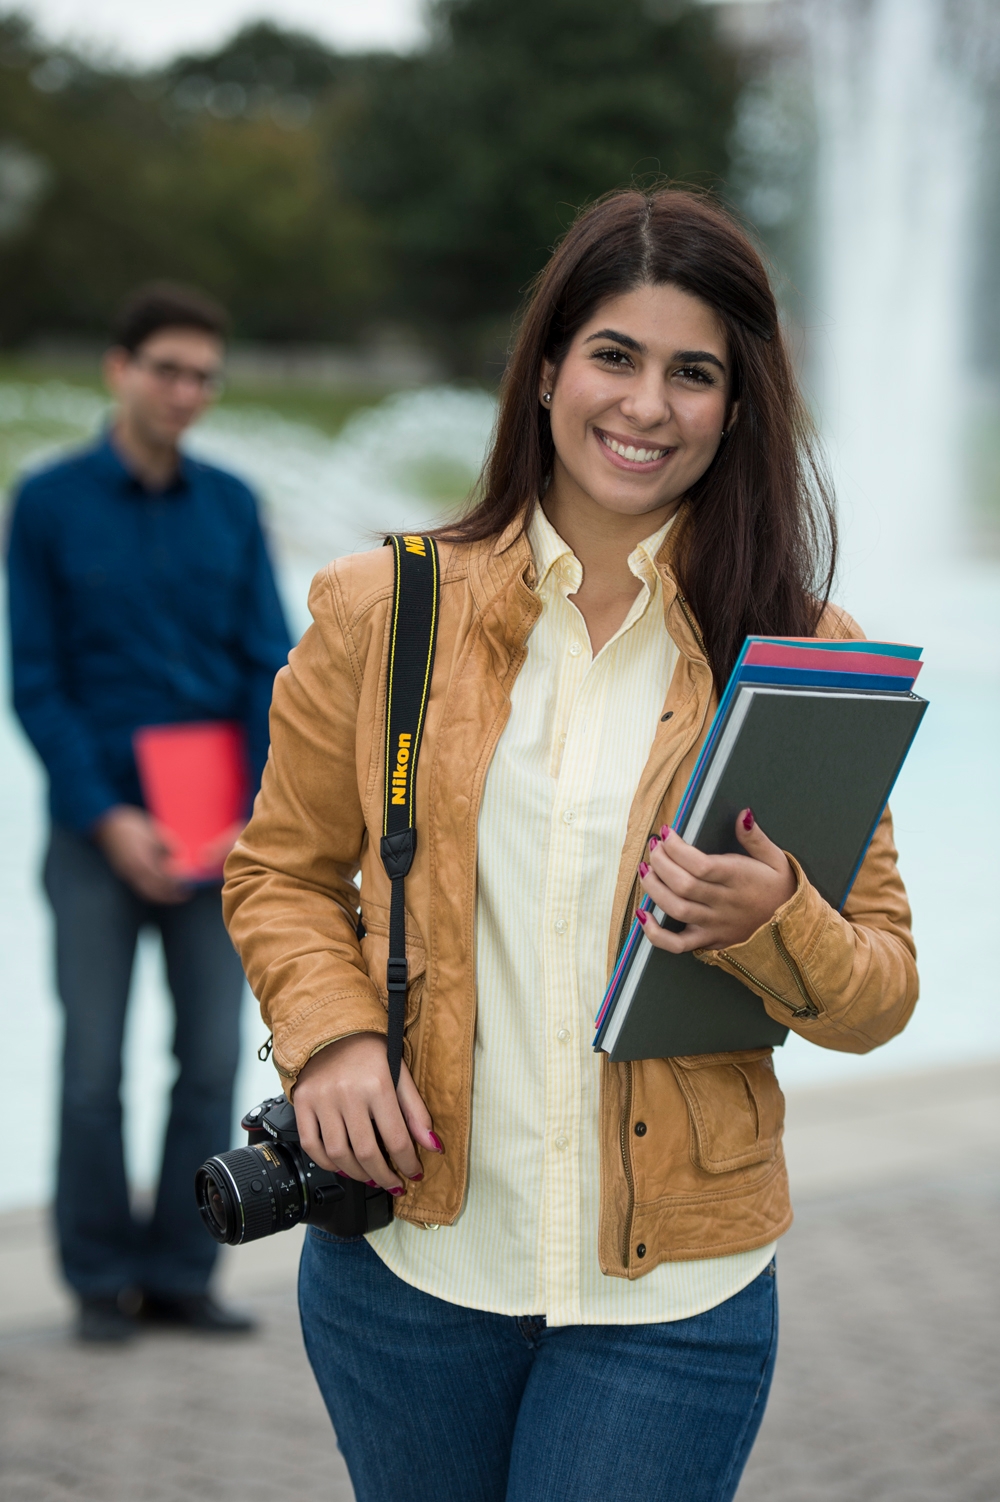 photo of a woman with her camera on her shoulder and a guy out of focus in the background